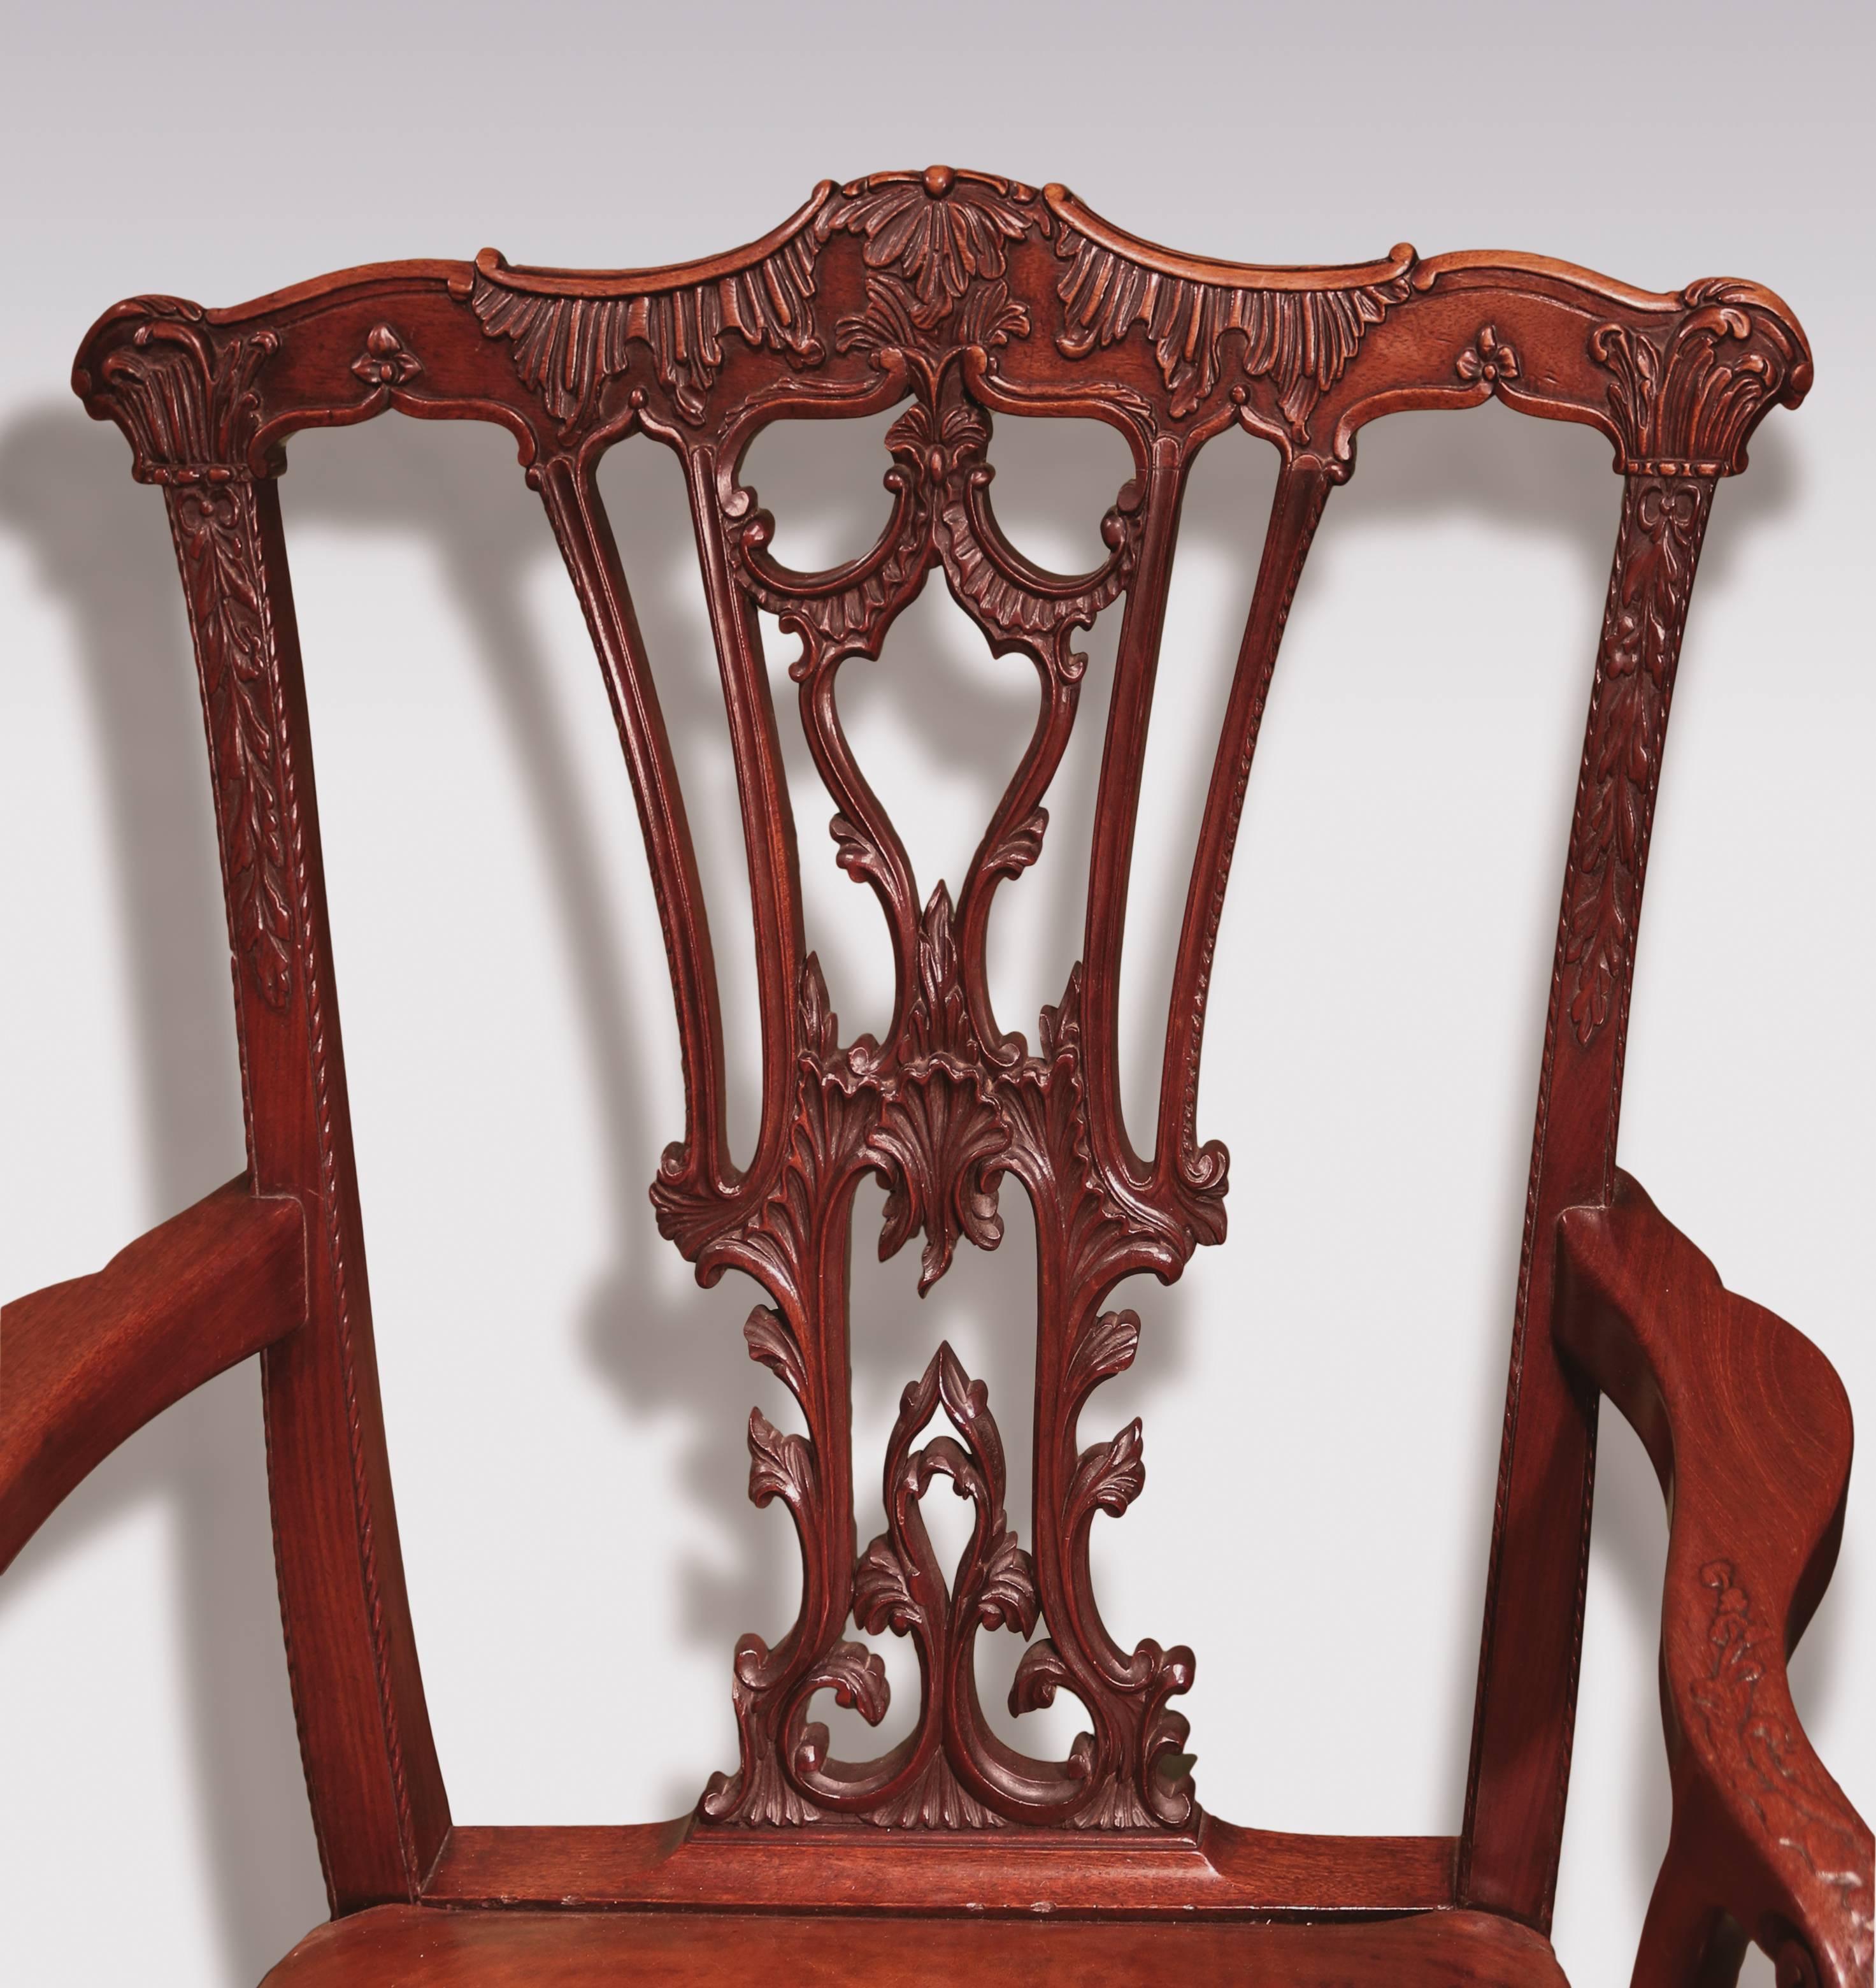 A mid-18th century Chippendale period mahogany armchair, having shaped top rail with intricate acanthus scroll carved pierced splat and carved scrolled outswept arms, above leather stuff-over seats, supported on square chamfered legs with carved edge